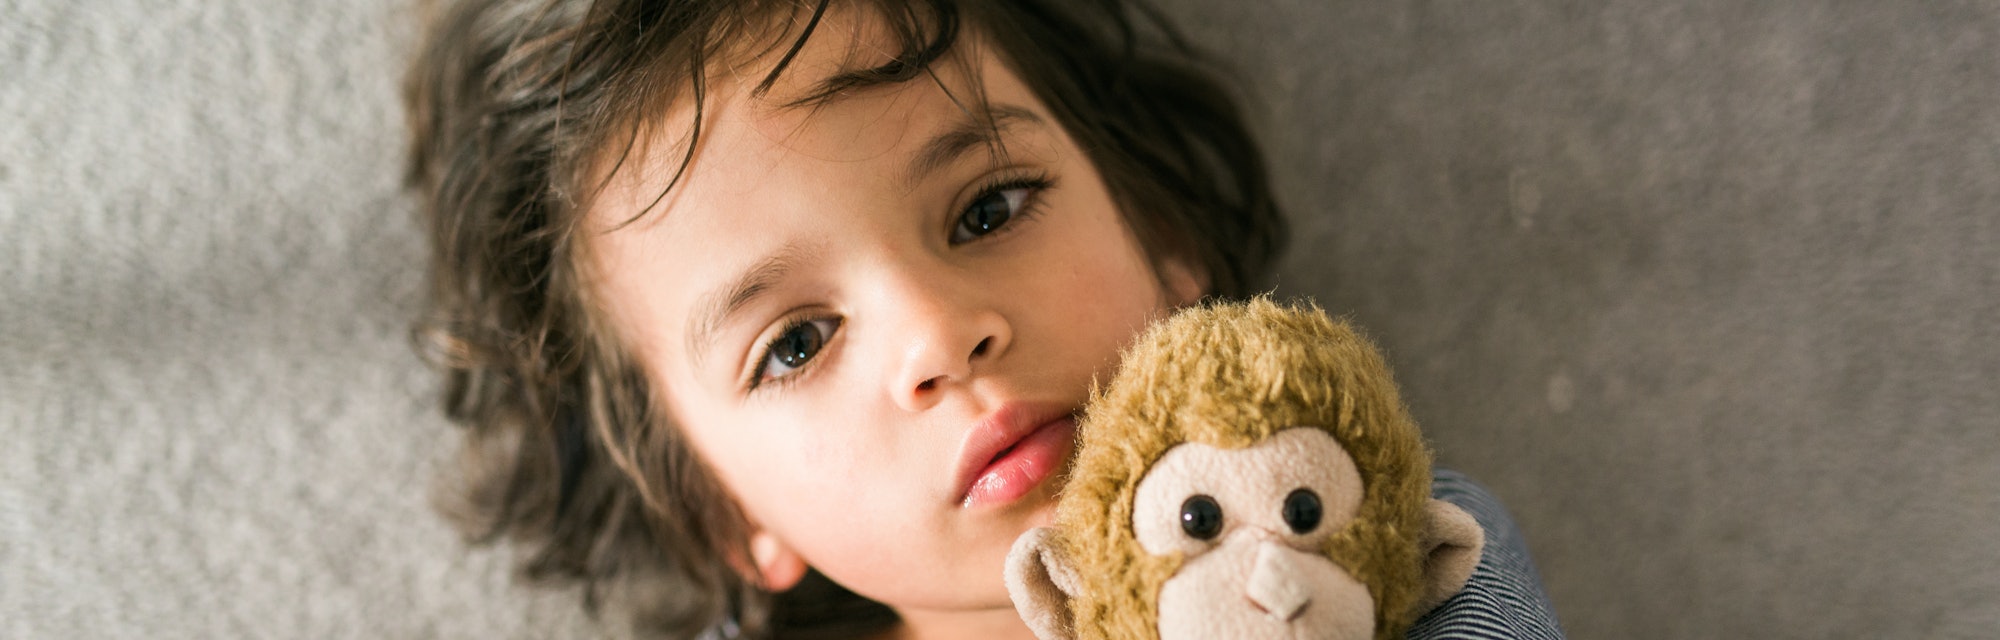 A small child looks up at the viewer, as he snuggles with his stuffed animal monkey on the floor